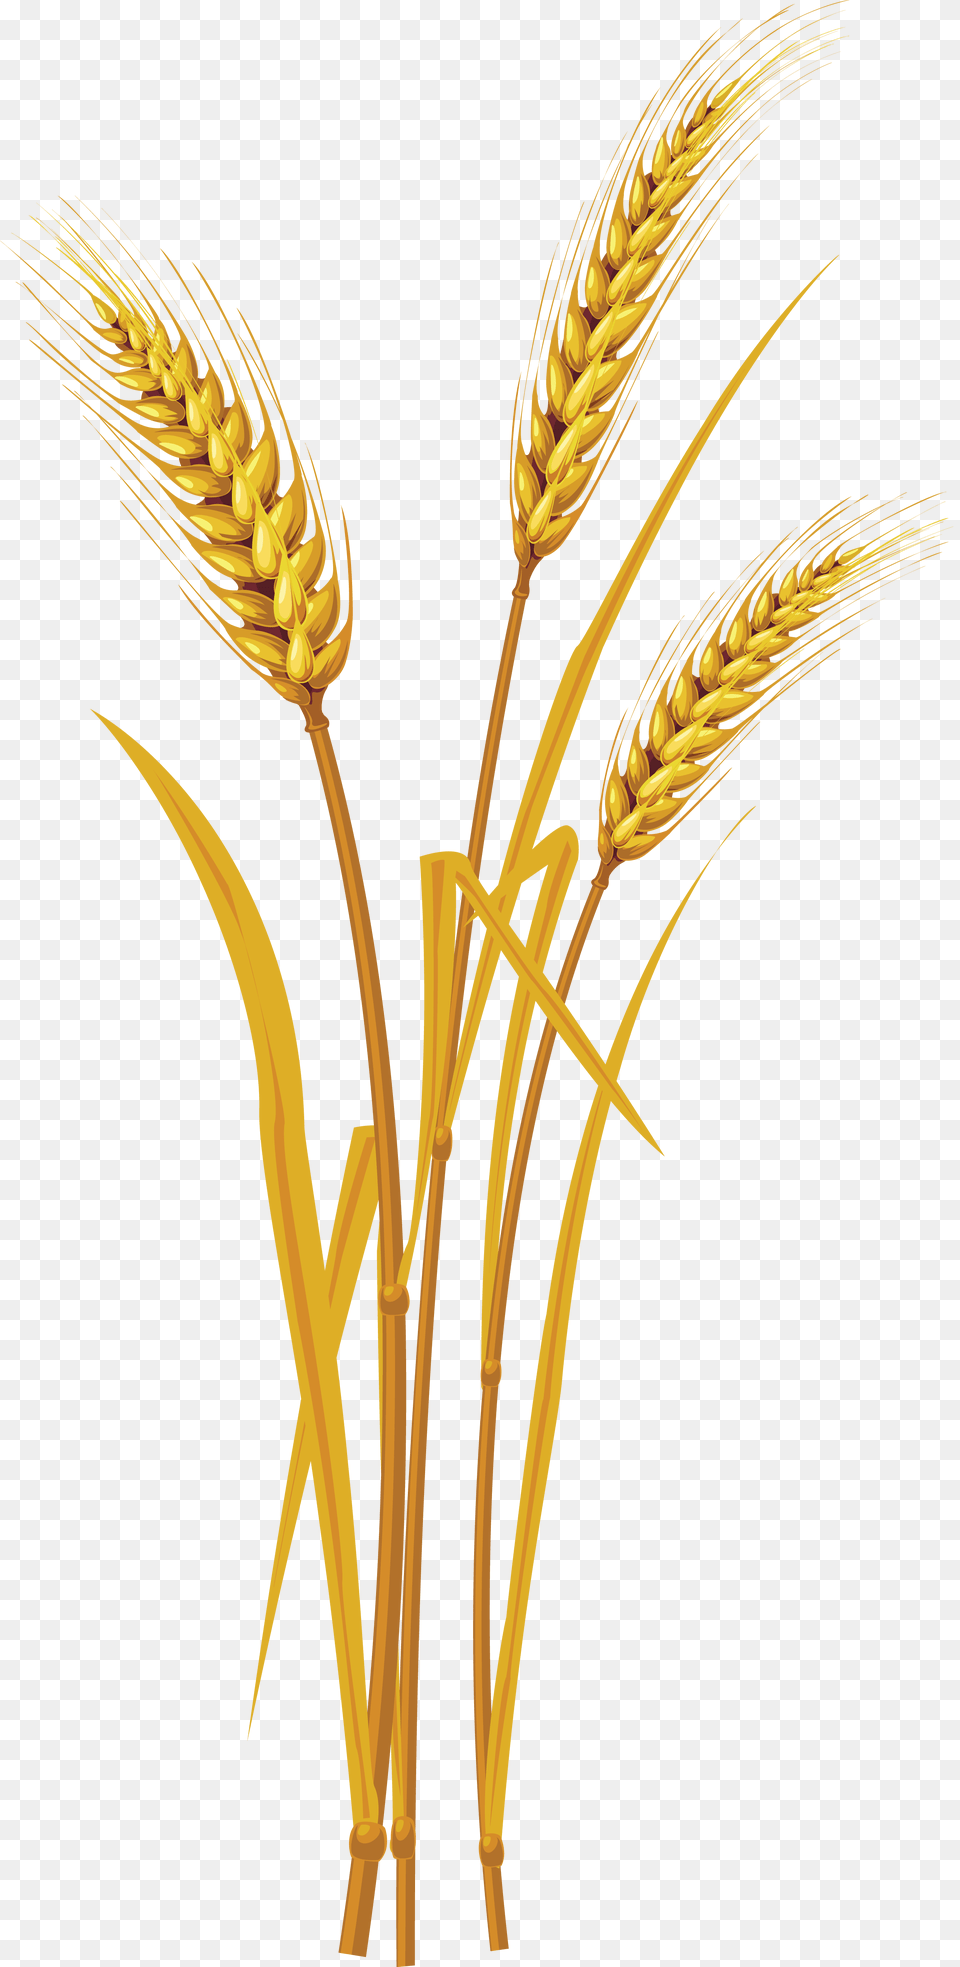 Download Wheat Image With No Transparent Background, Food, Grain, Produce Png